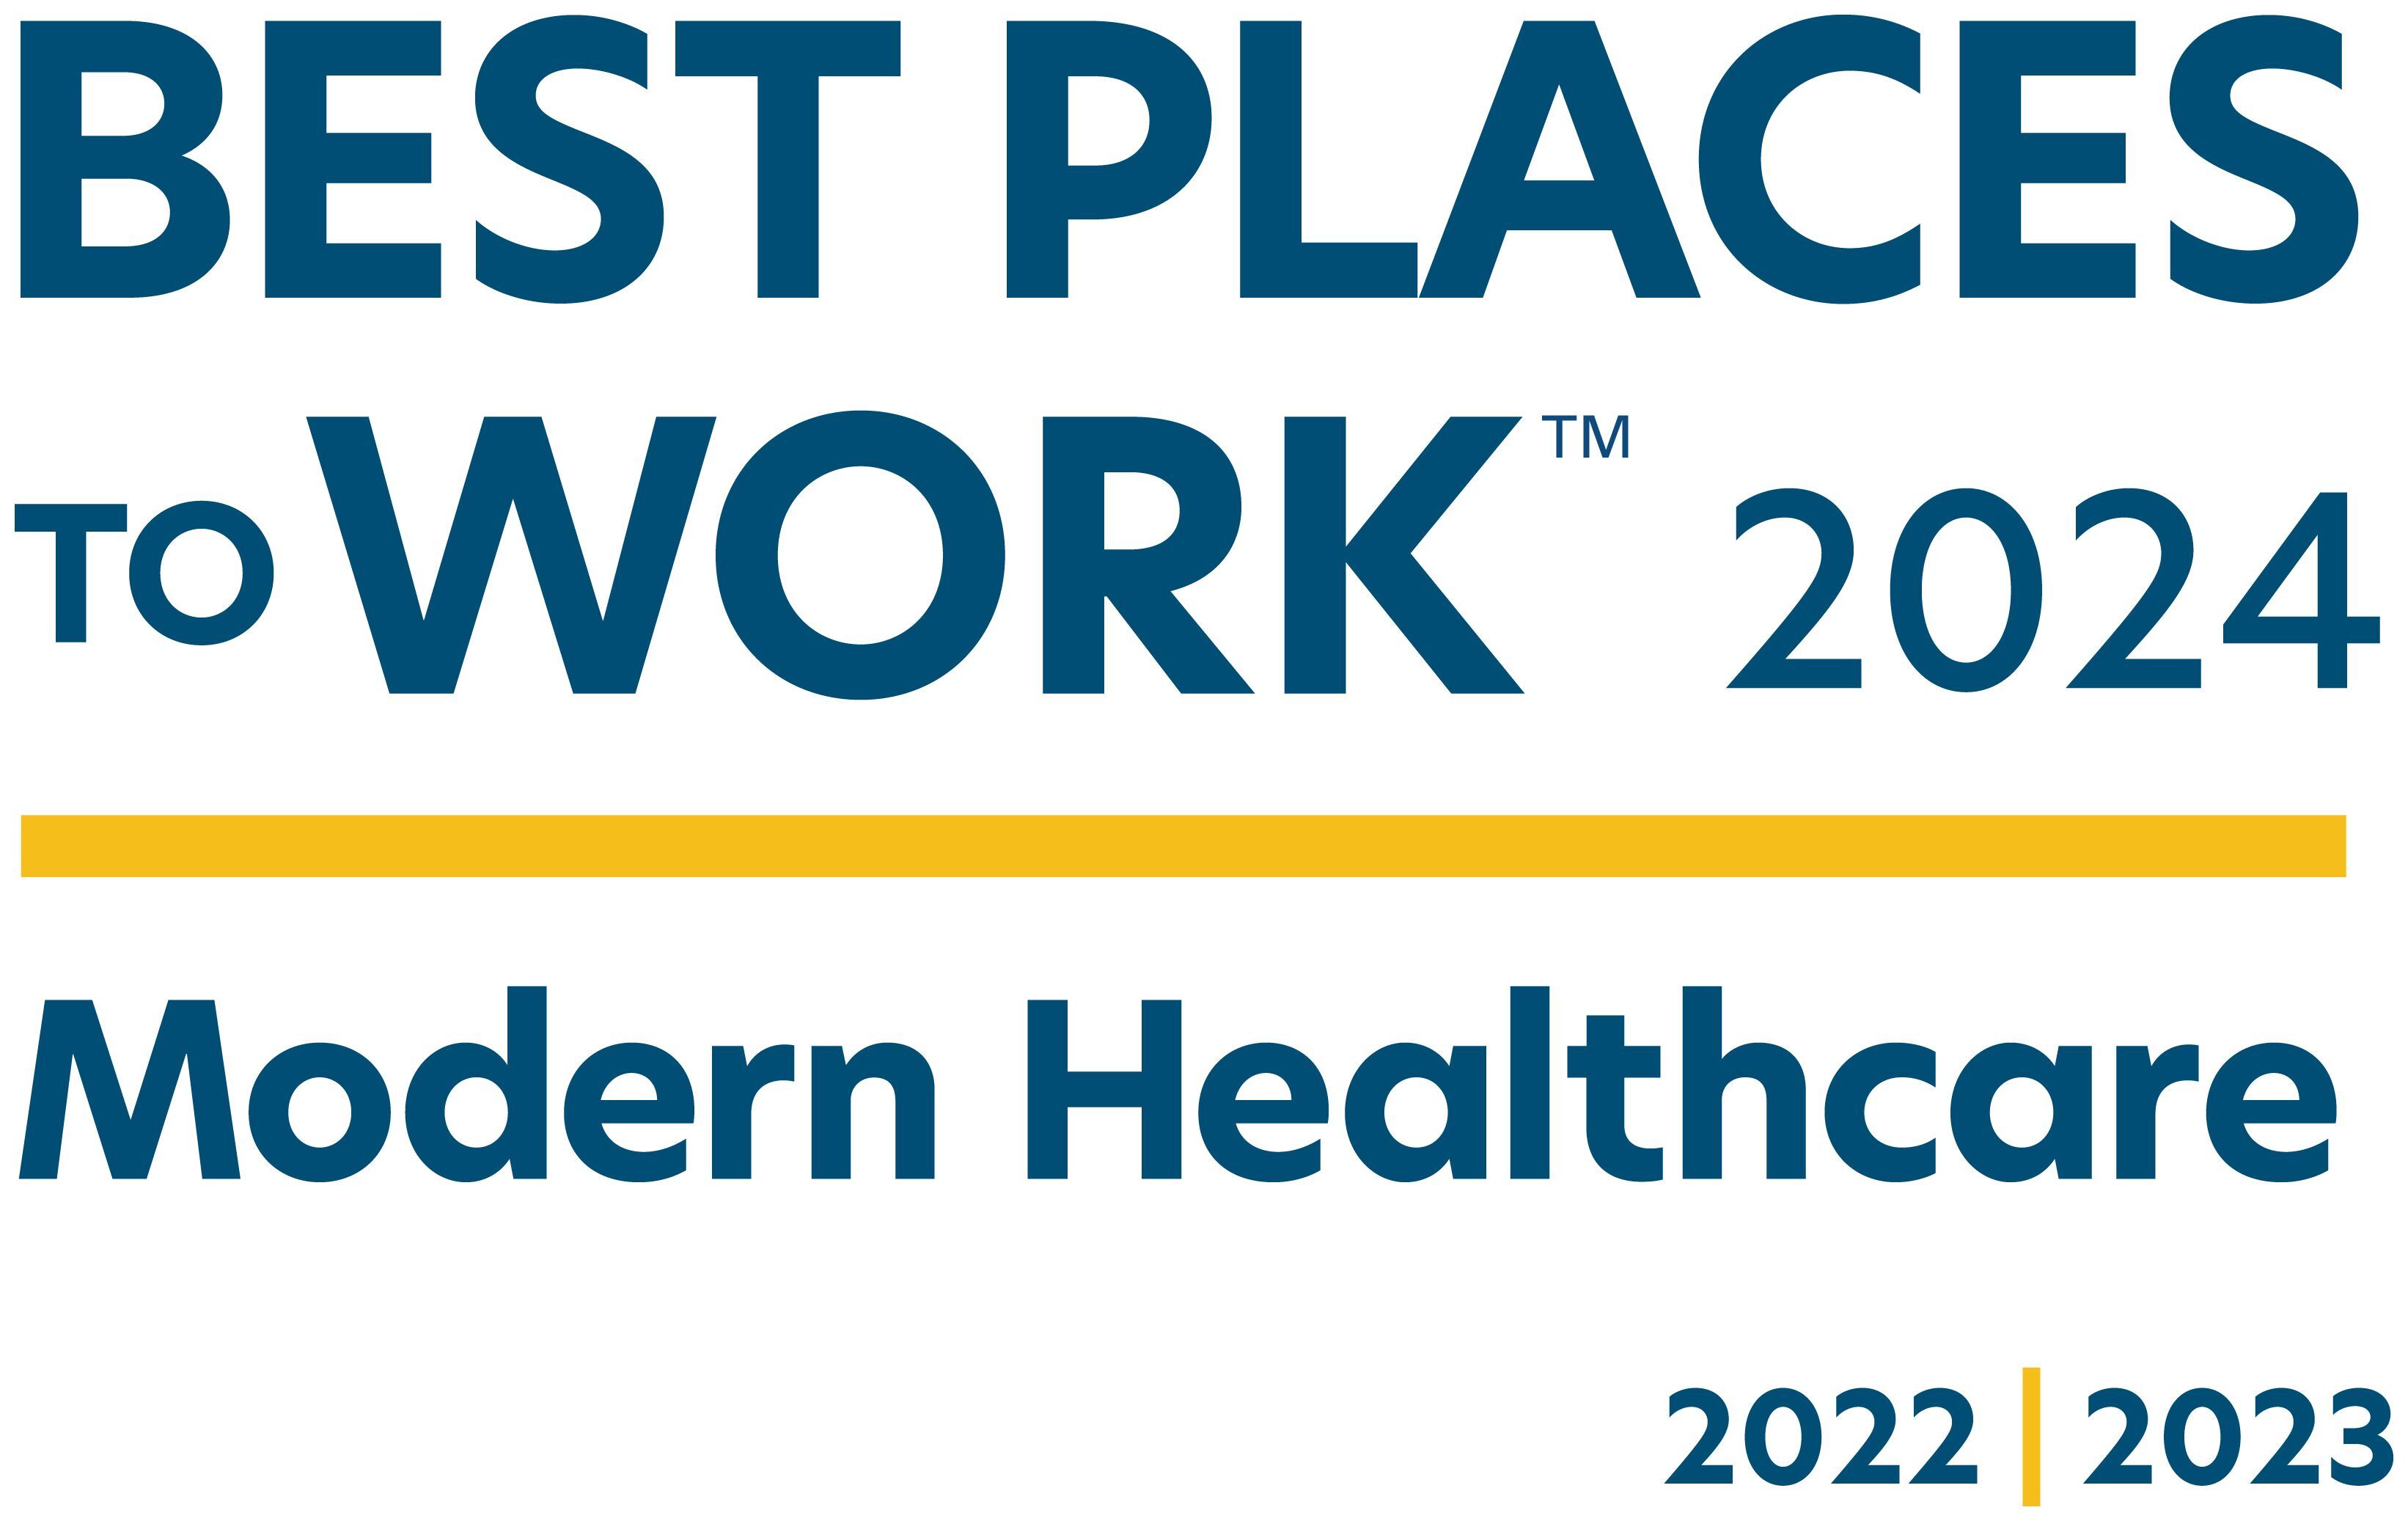 Best Places to Work 2022, 2023, 2024